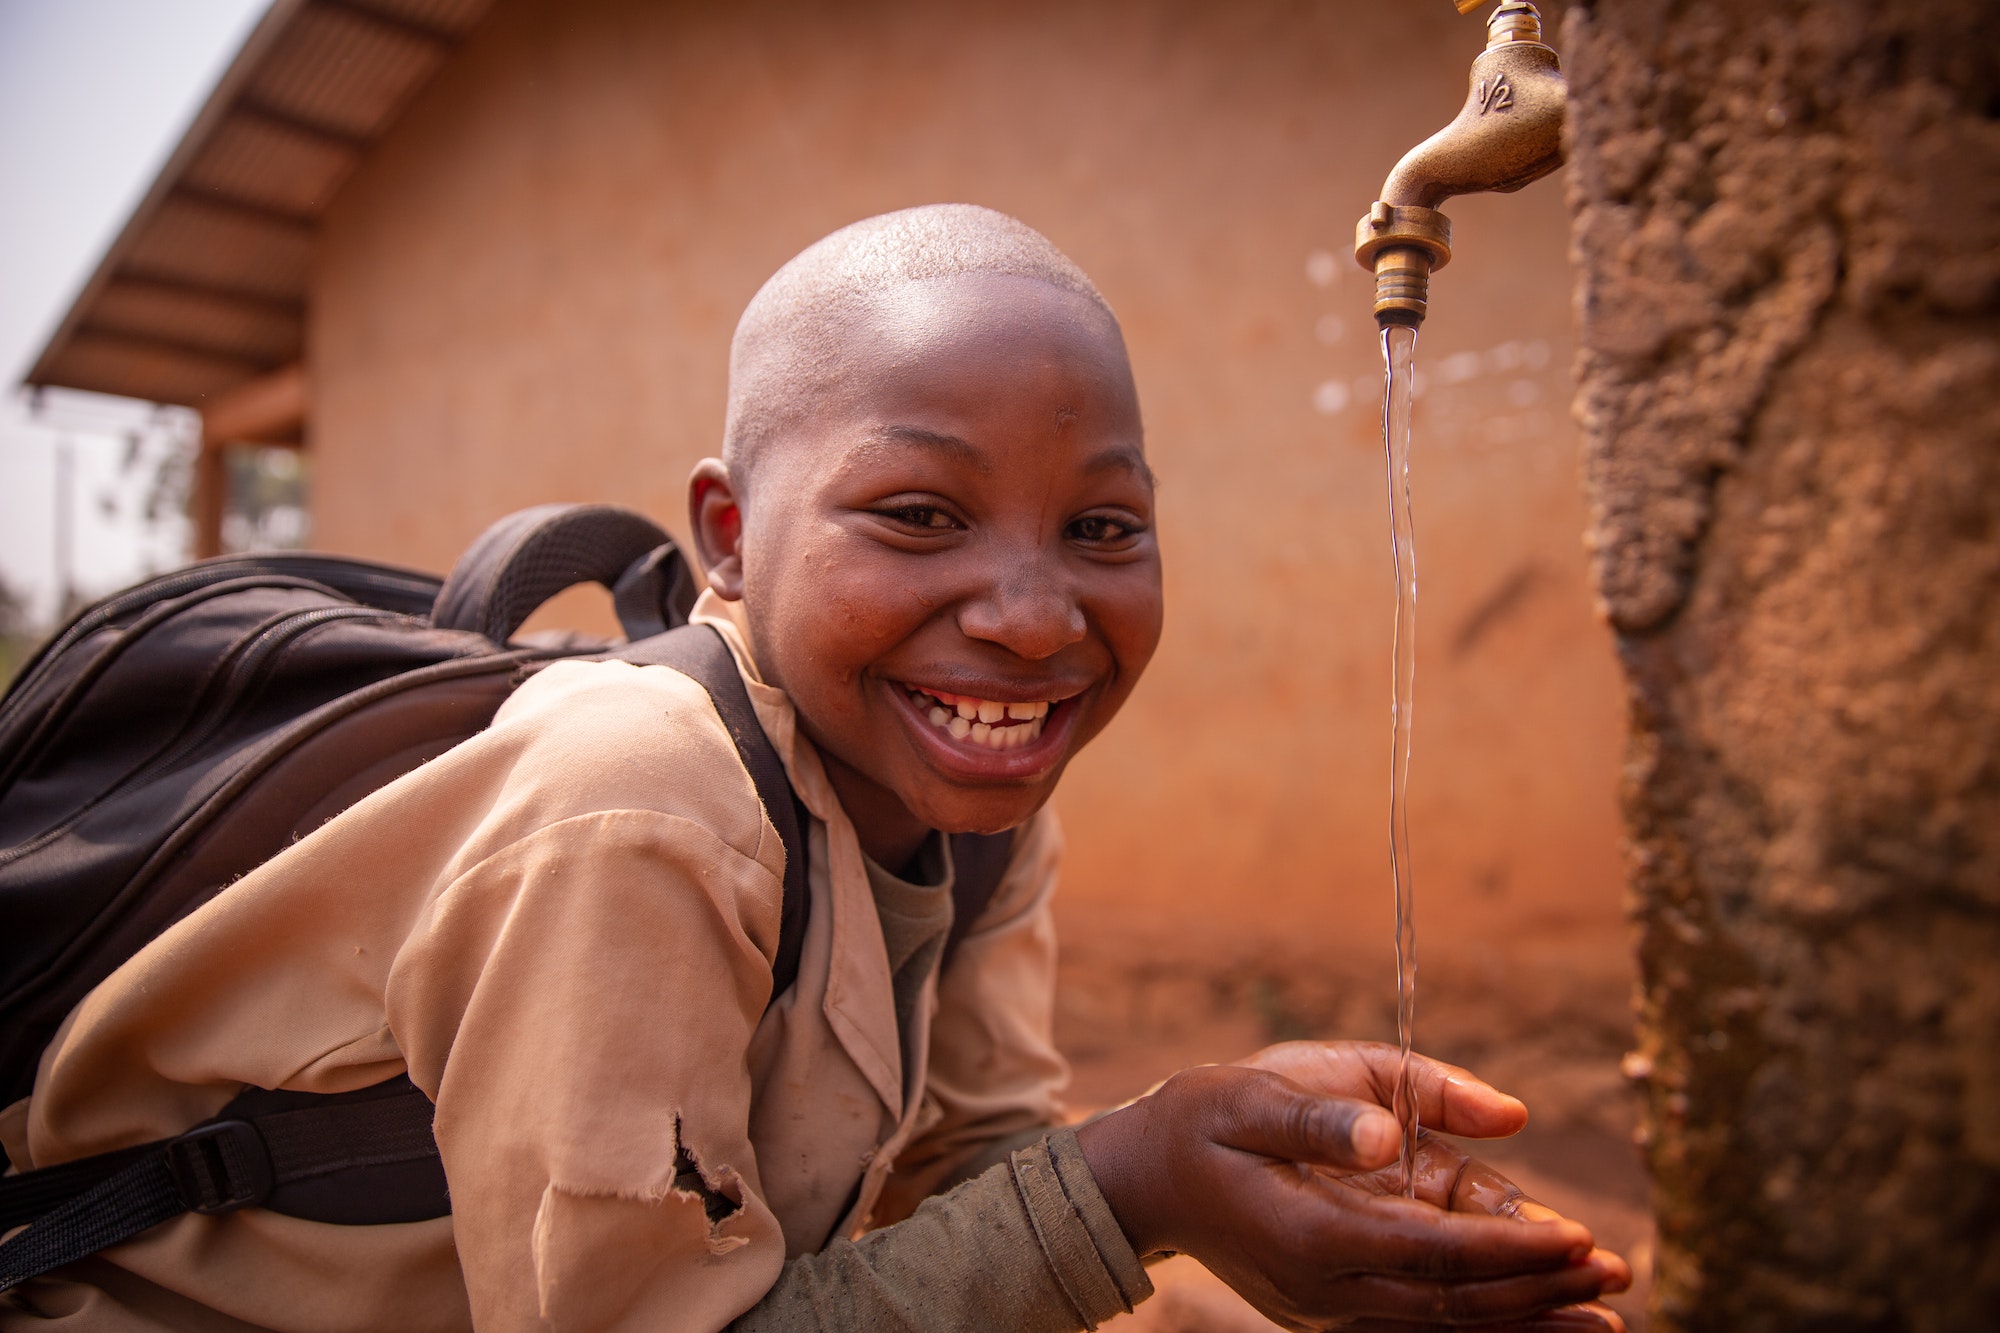 African schoolboy at school smiles drinking water from the tap outside in the courtyard